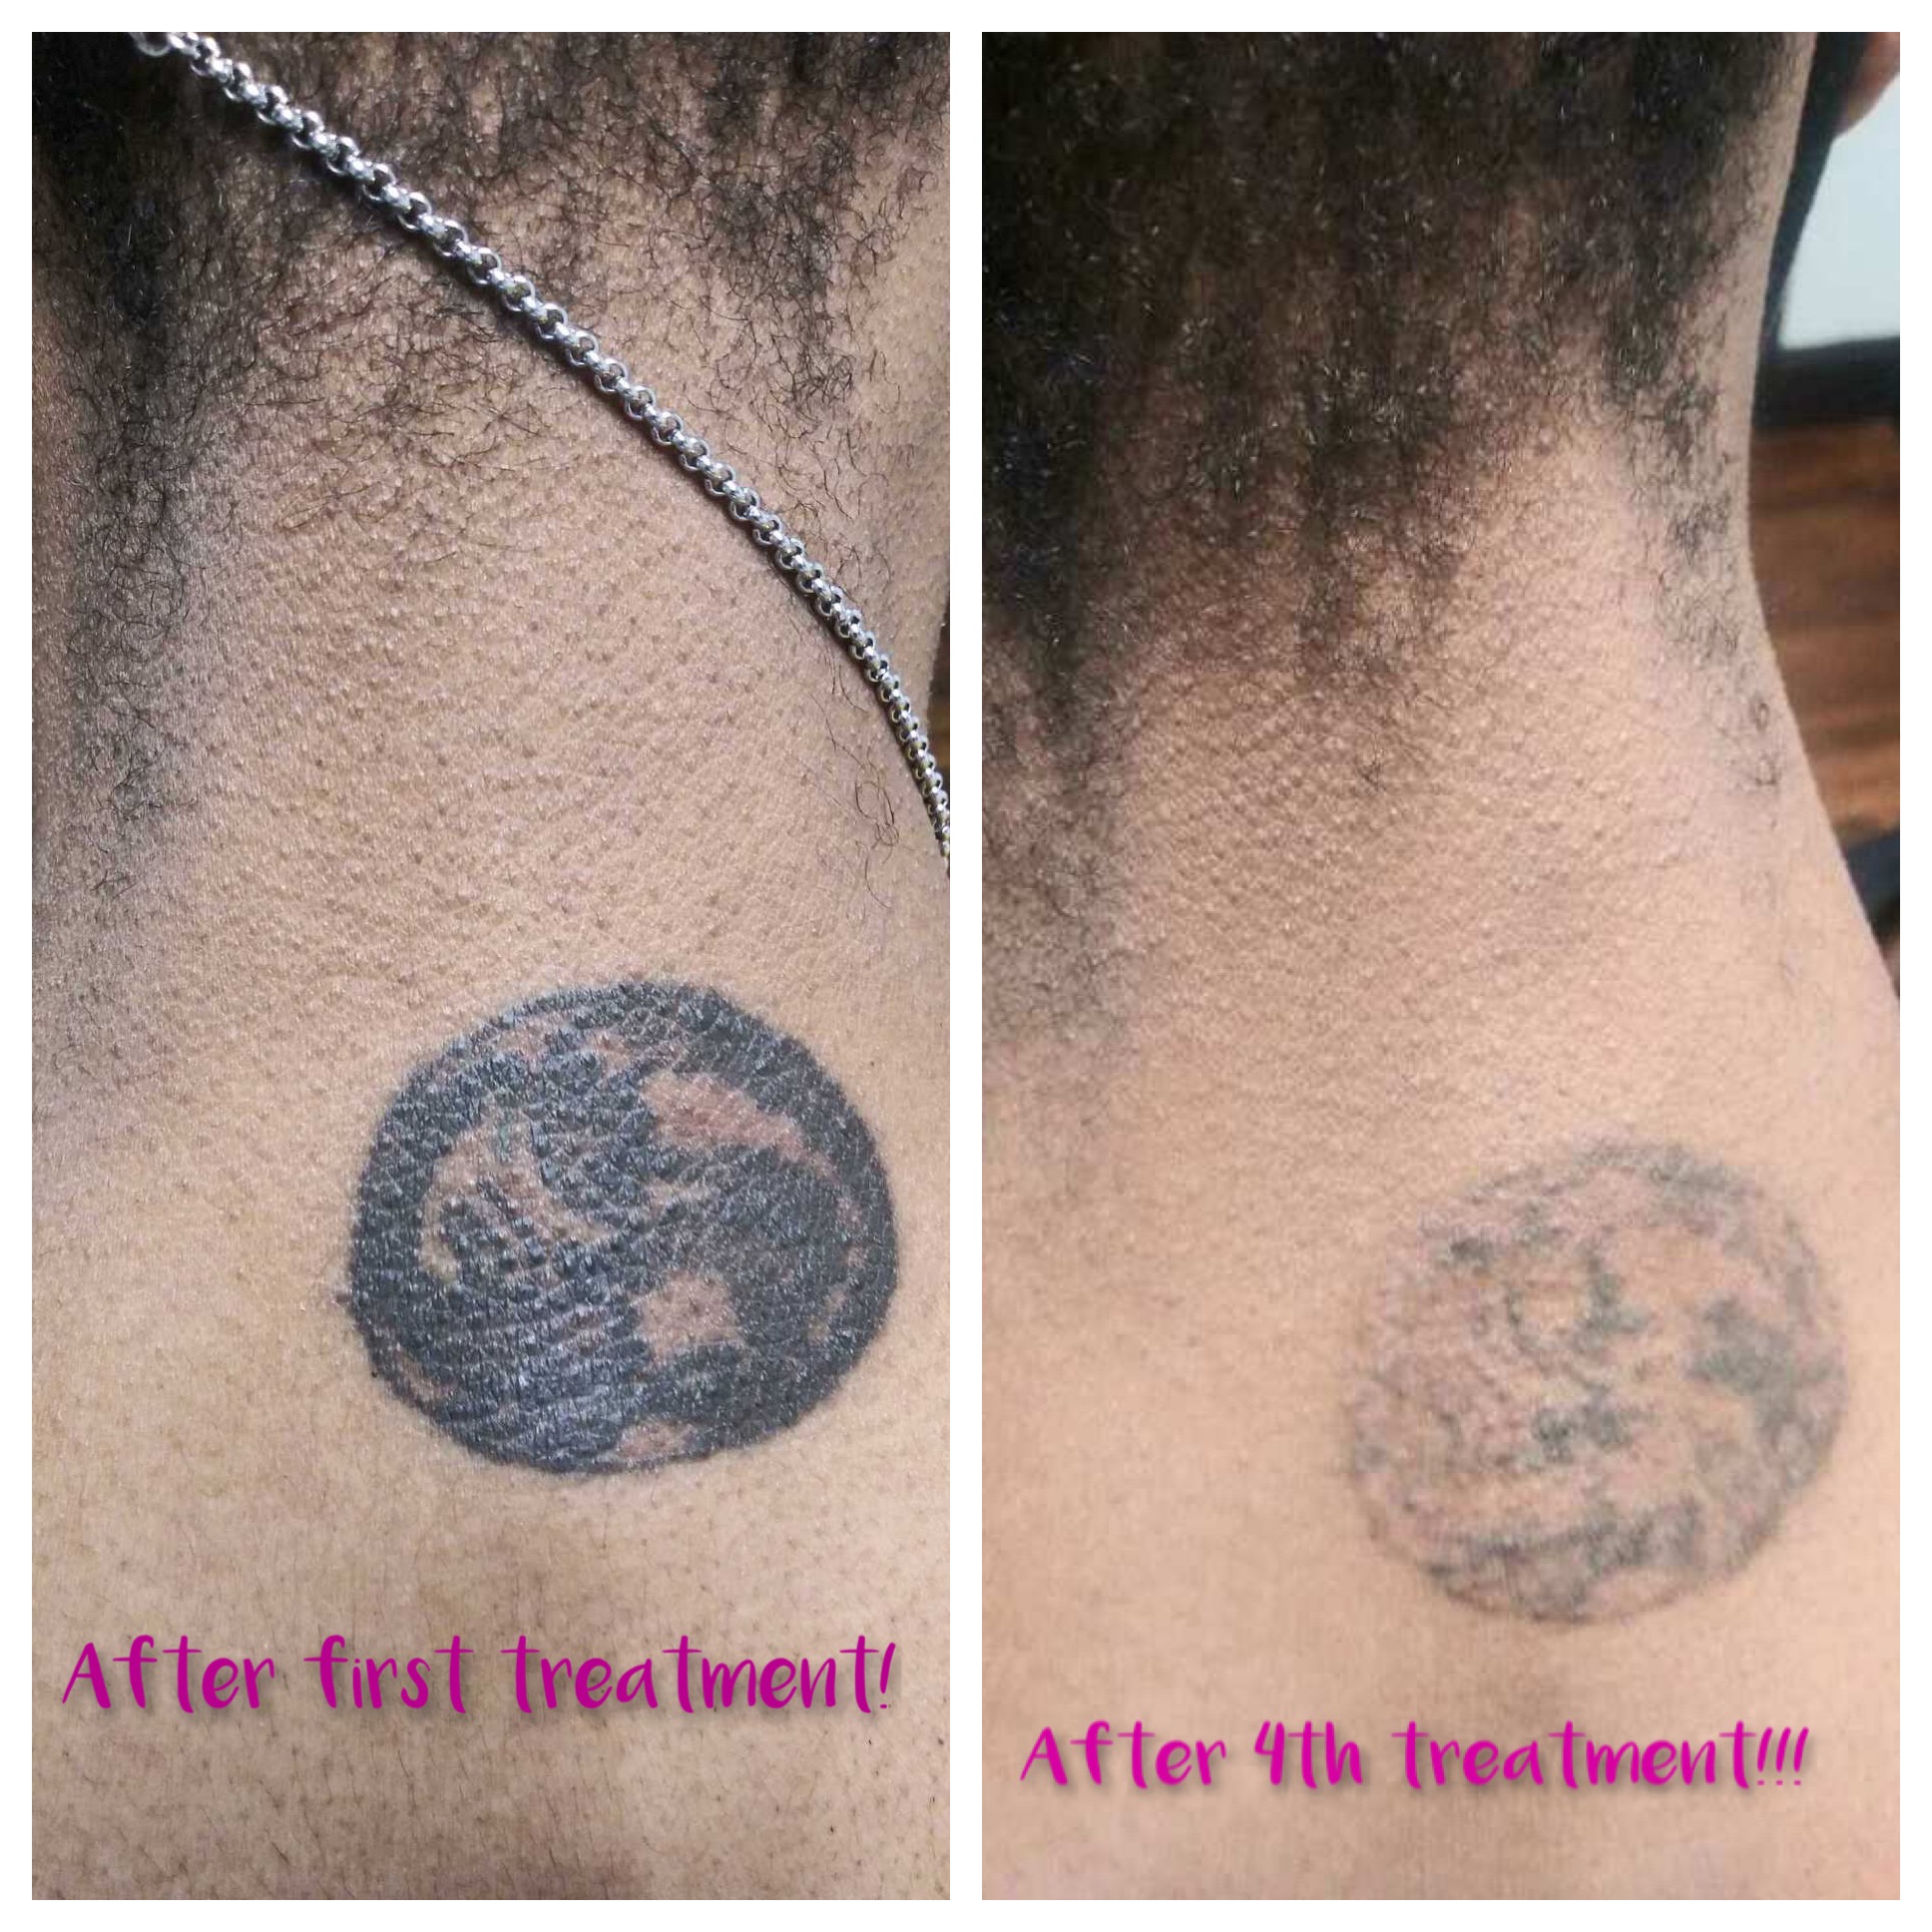 What is the Best Non-Surgical Treatment for Tattoo Removal?